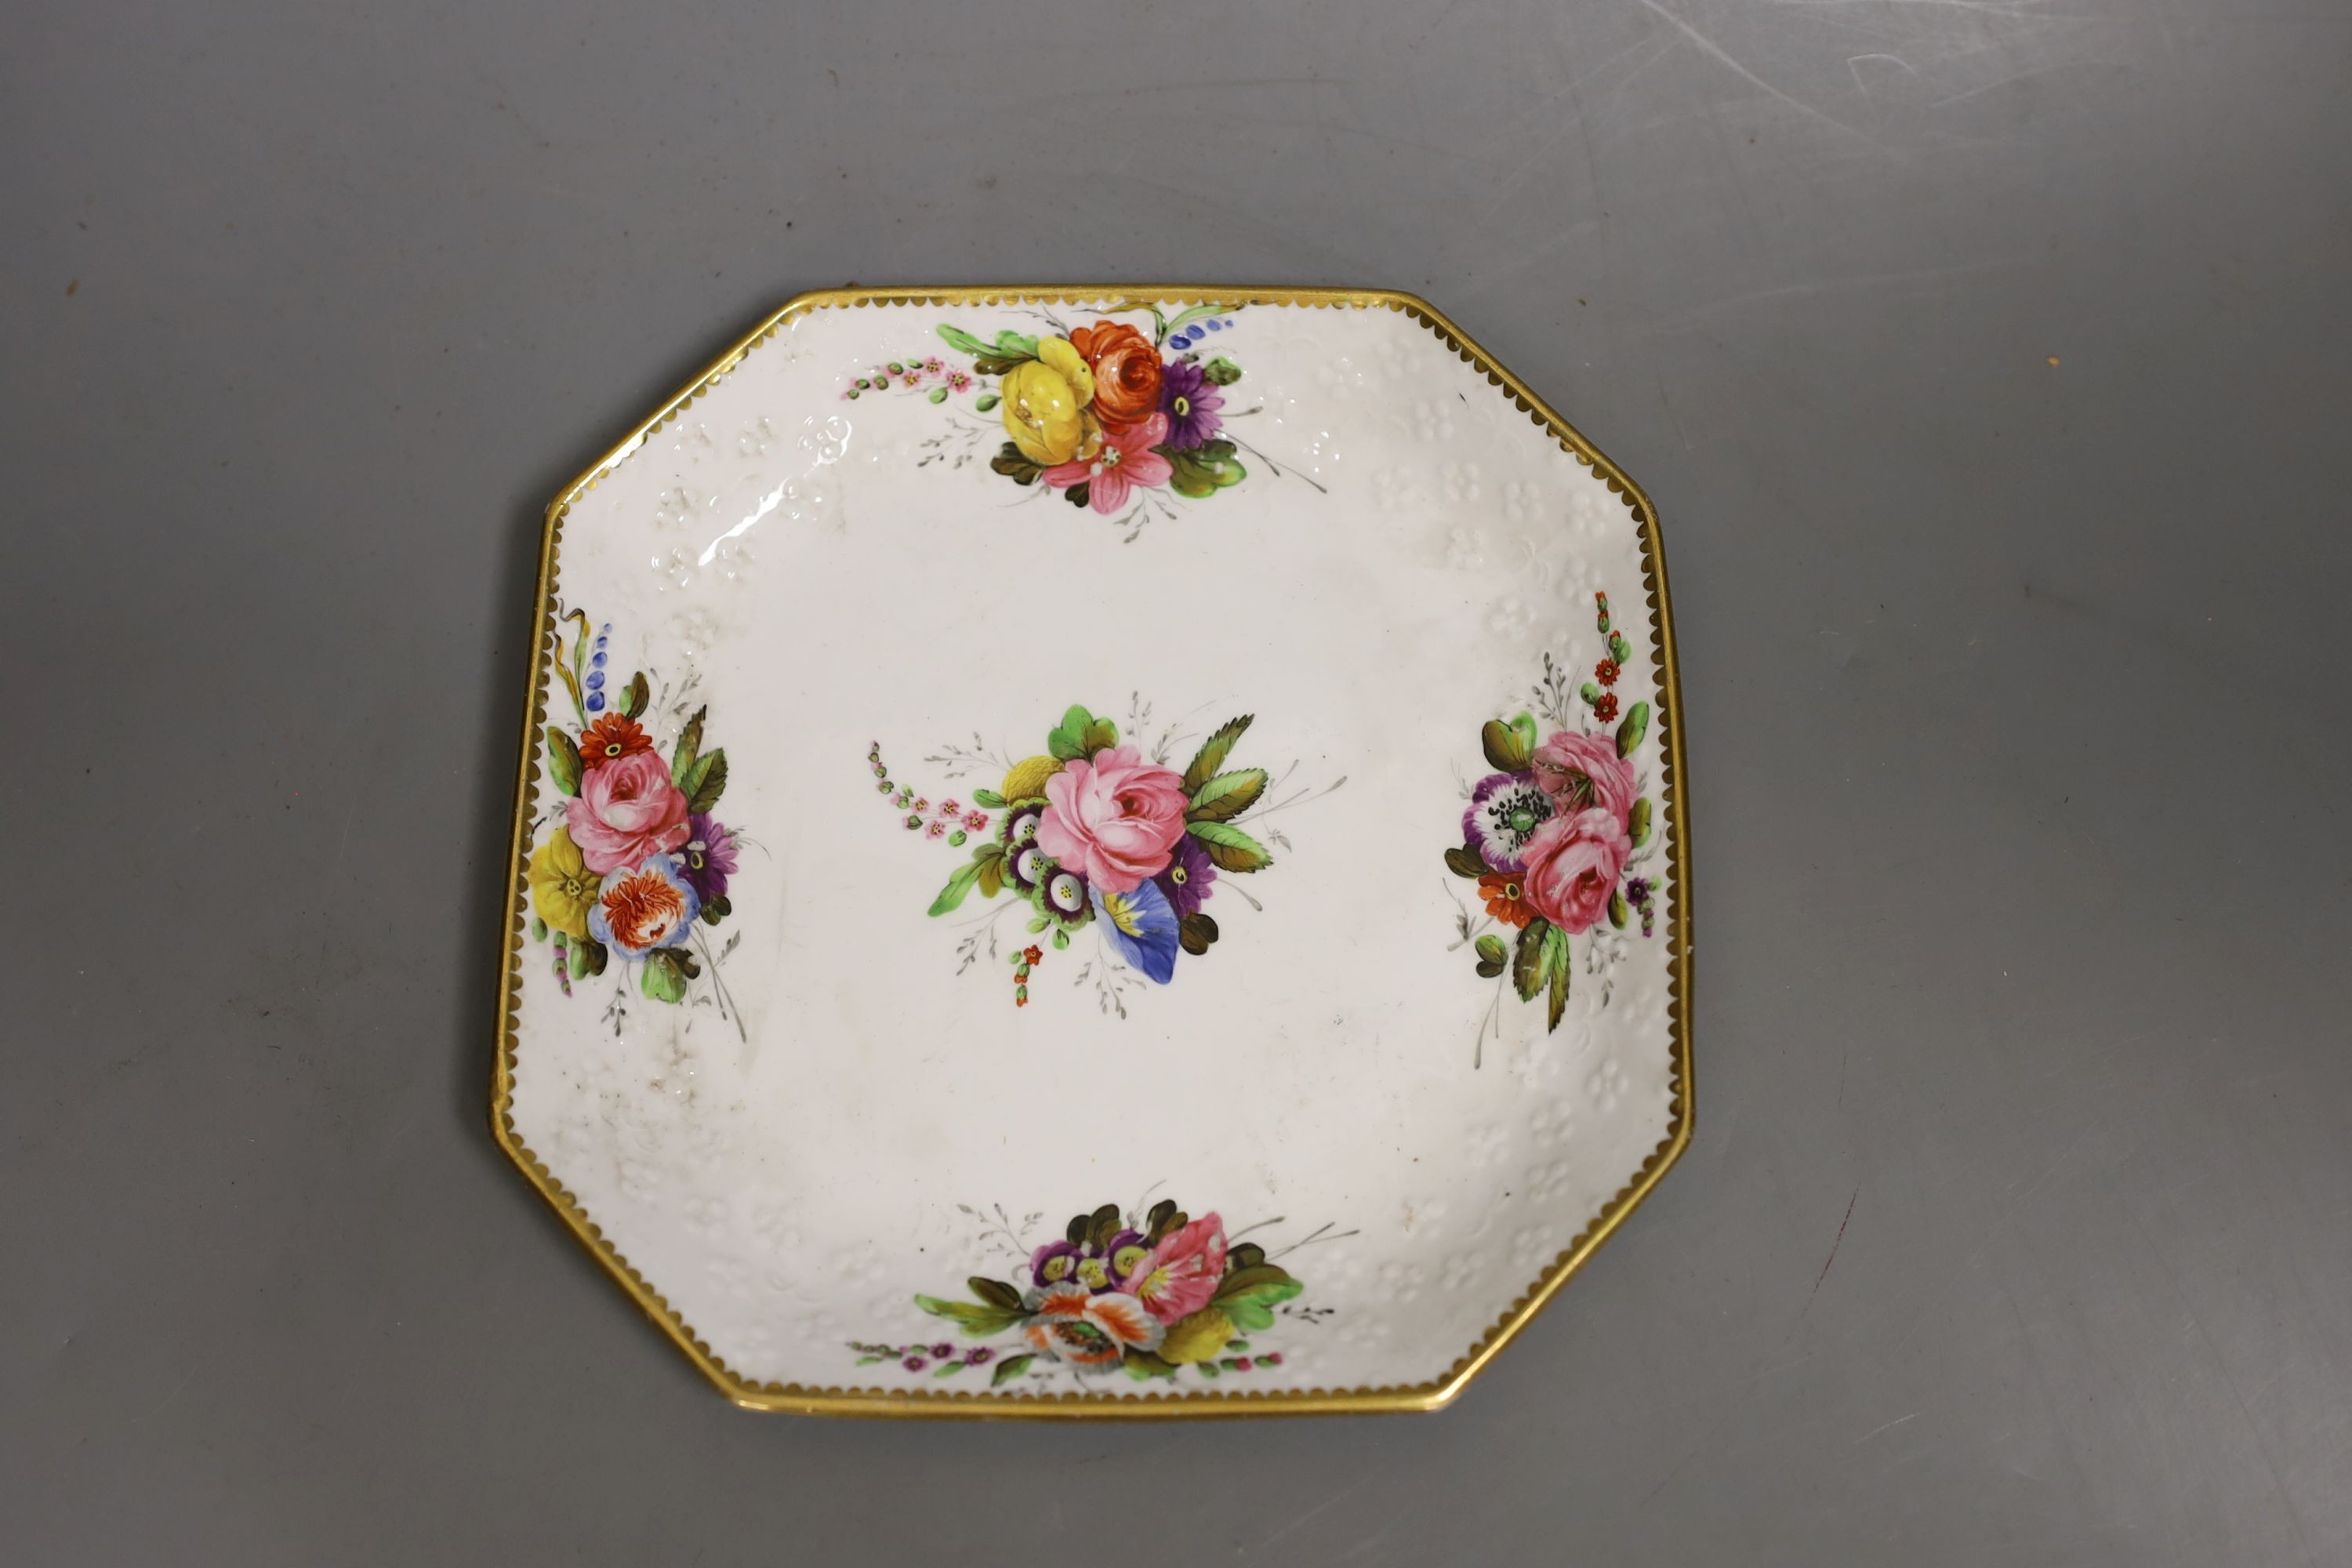 A Spode teapot cover and stand painted with flowers on a moulded body pattern 2527, c.1820, 24cm long